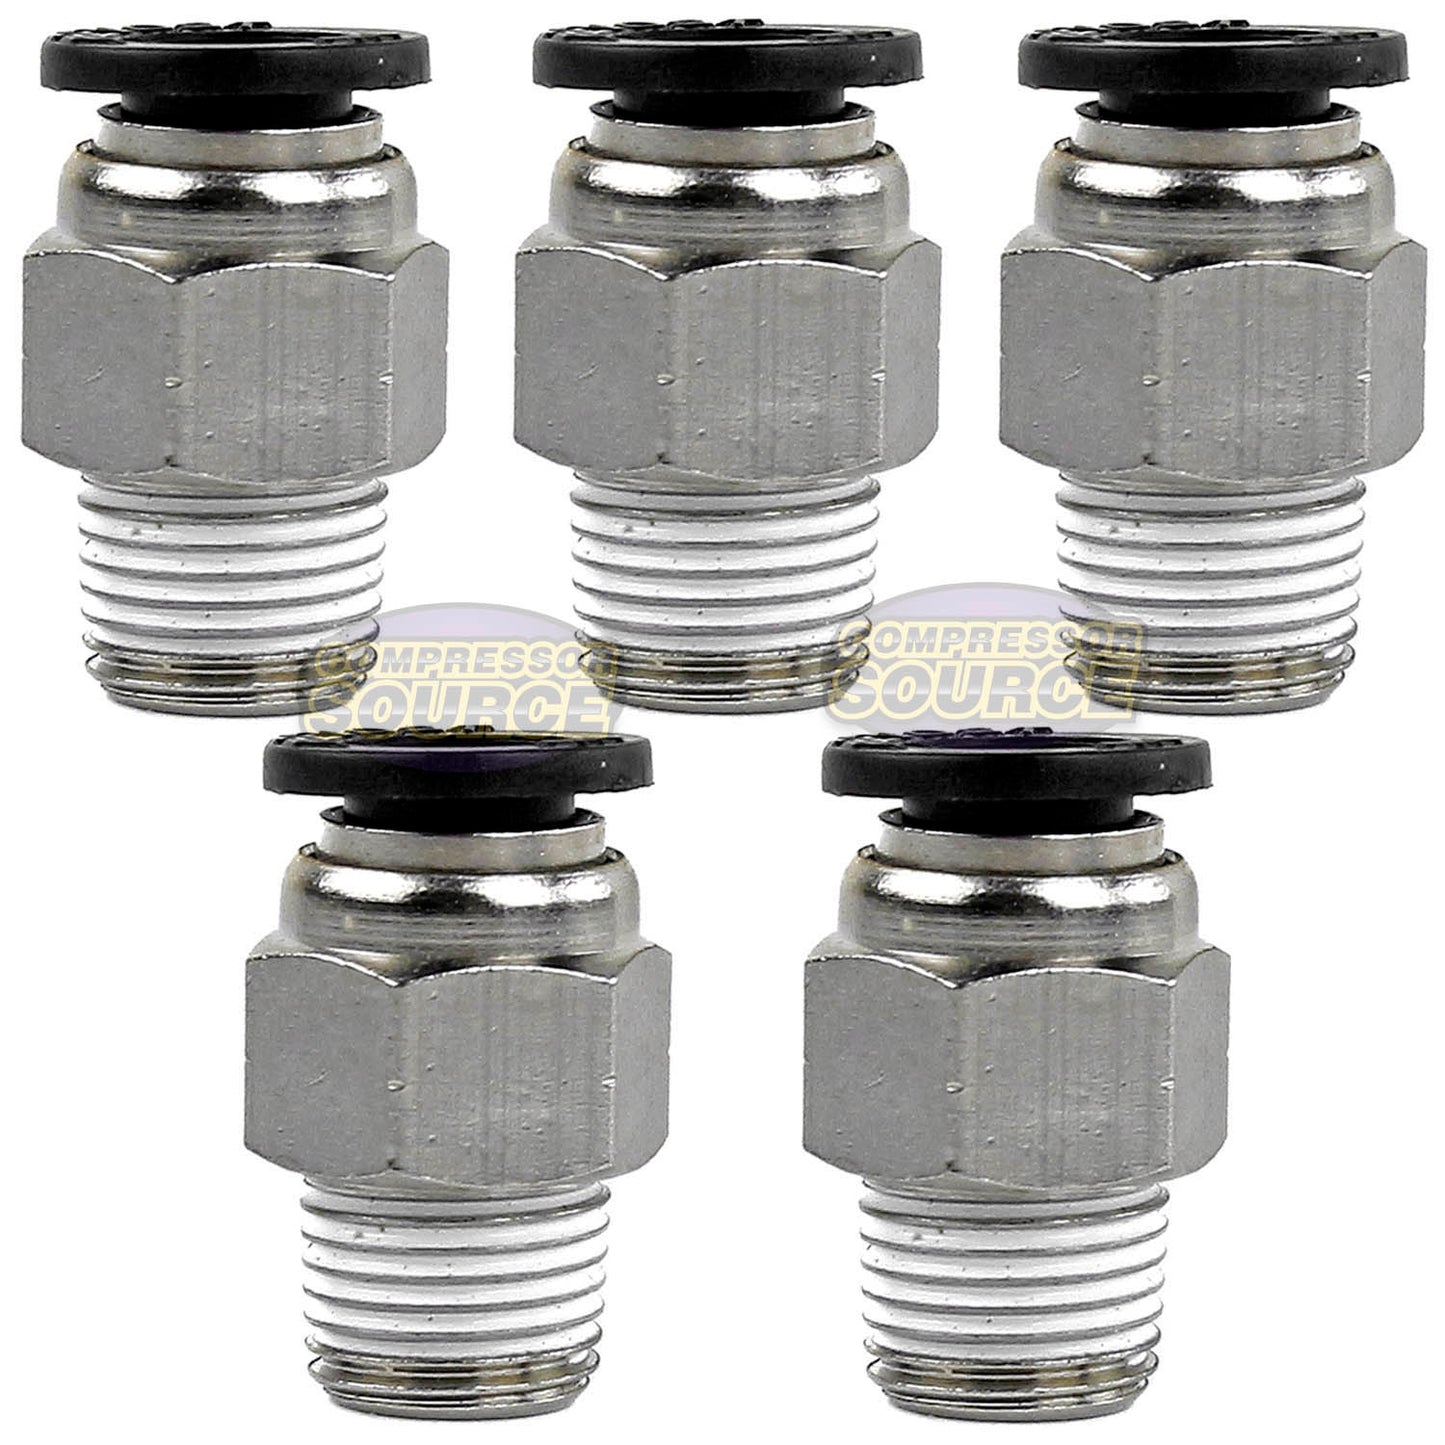 5 Pack 1/8" Male NPT x 1/4 OD Tube Female Push In To Lock Connect Straight Fitting Prevost RPDMR4120